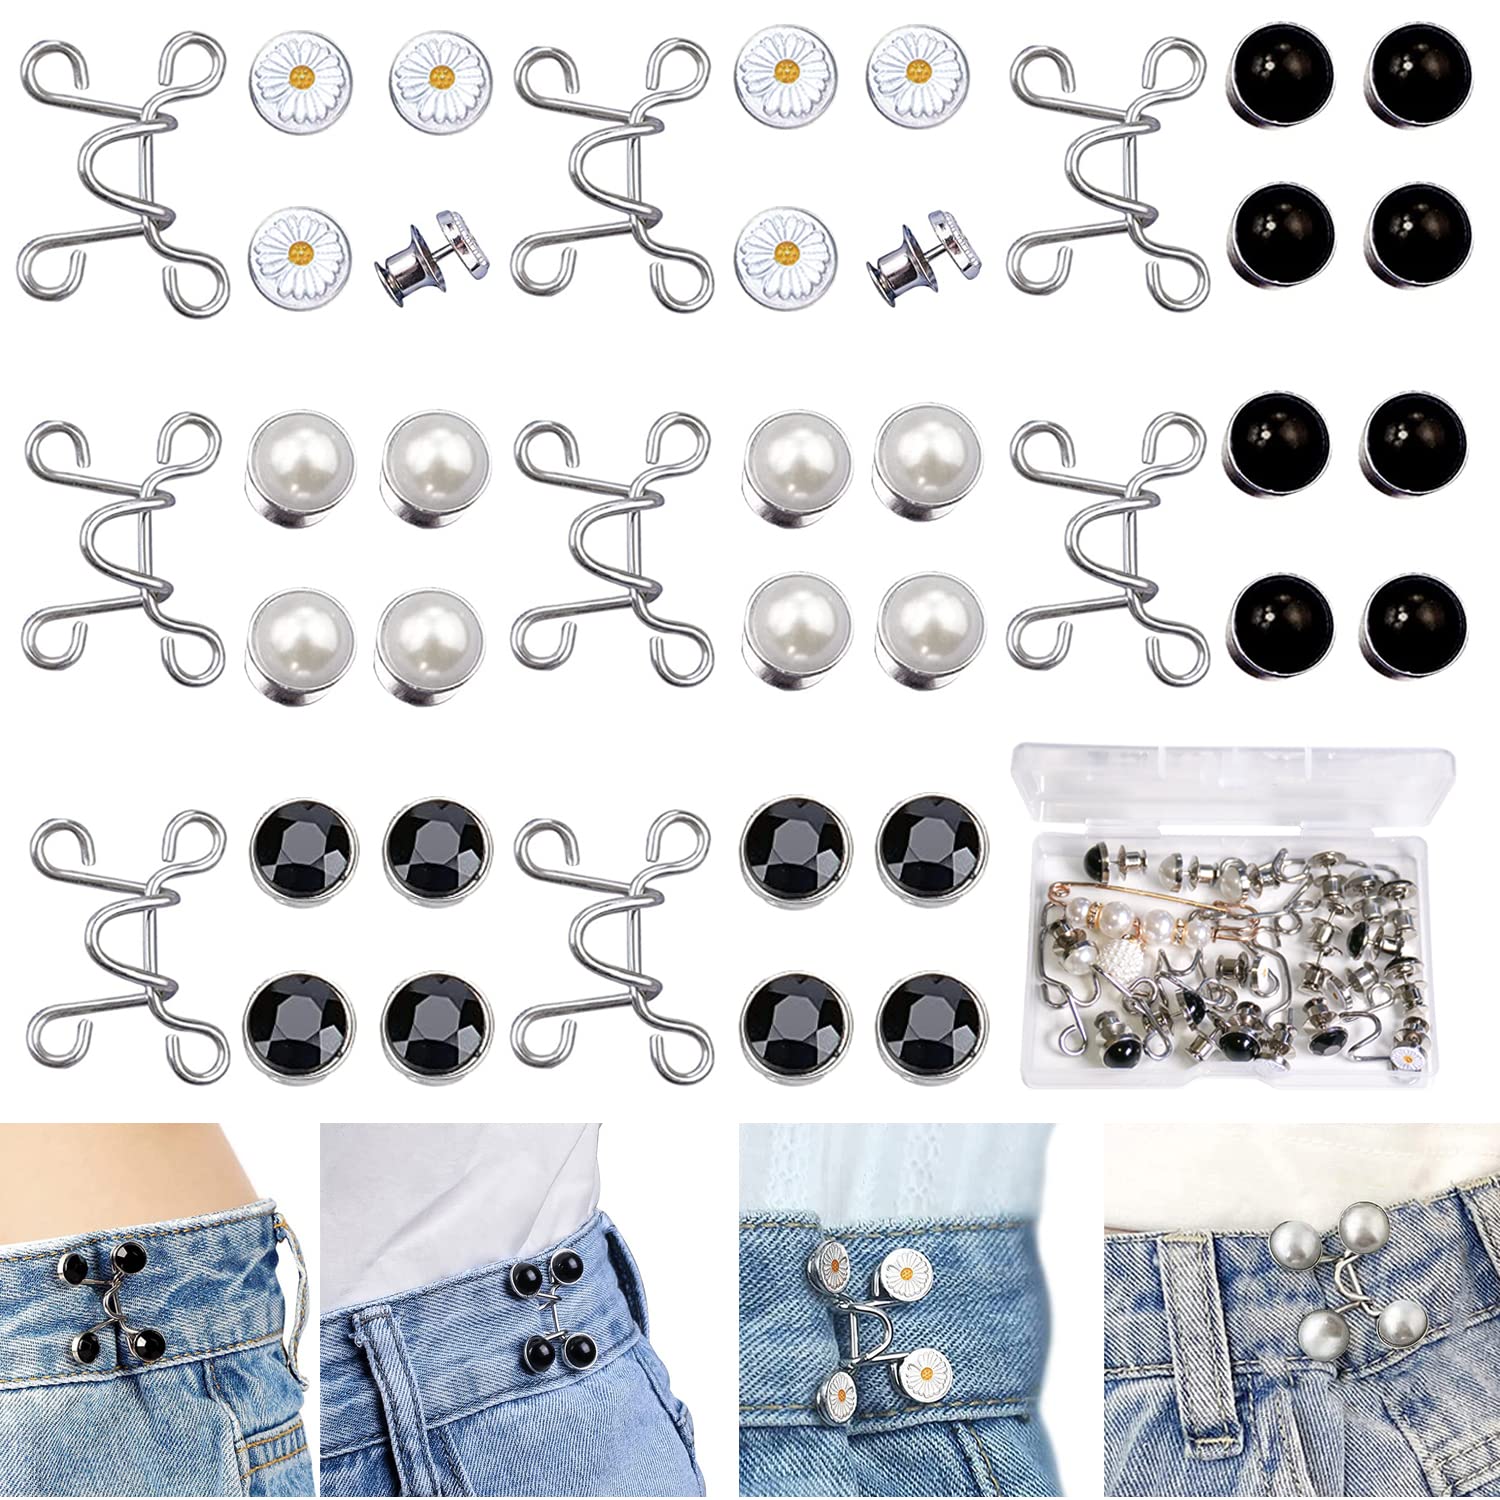 Jean Button Pins, Adjustable Jeans Button Set, Detachable Button for Jeans  Too Big, Waist Tightener Fastener for Pants, No Sewing Required (White)